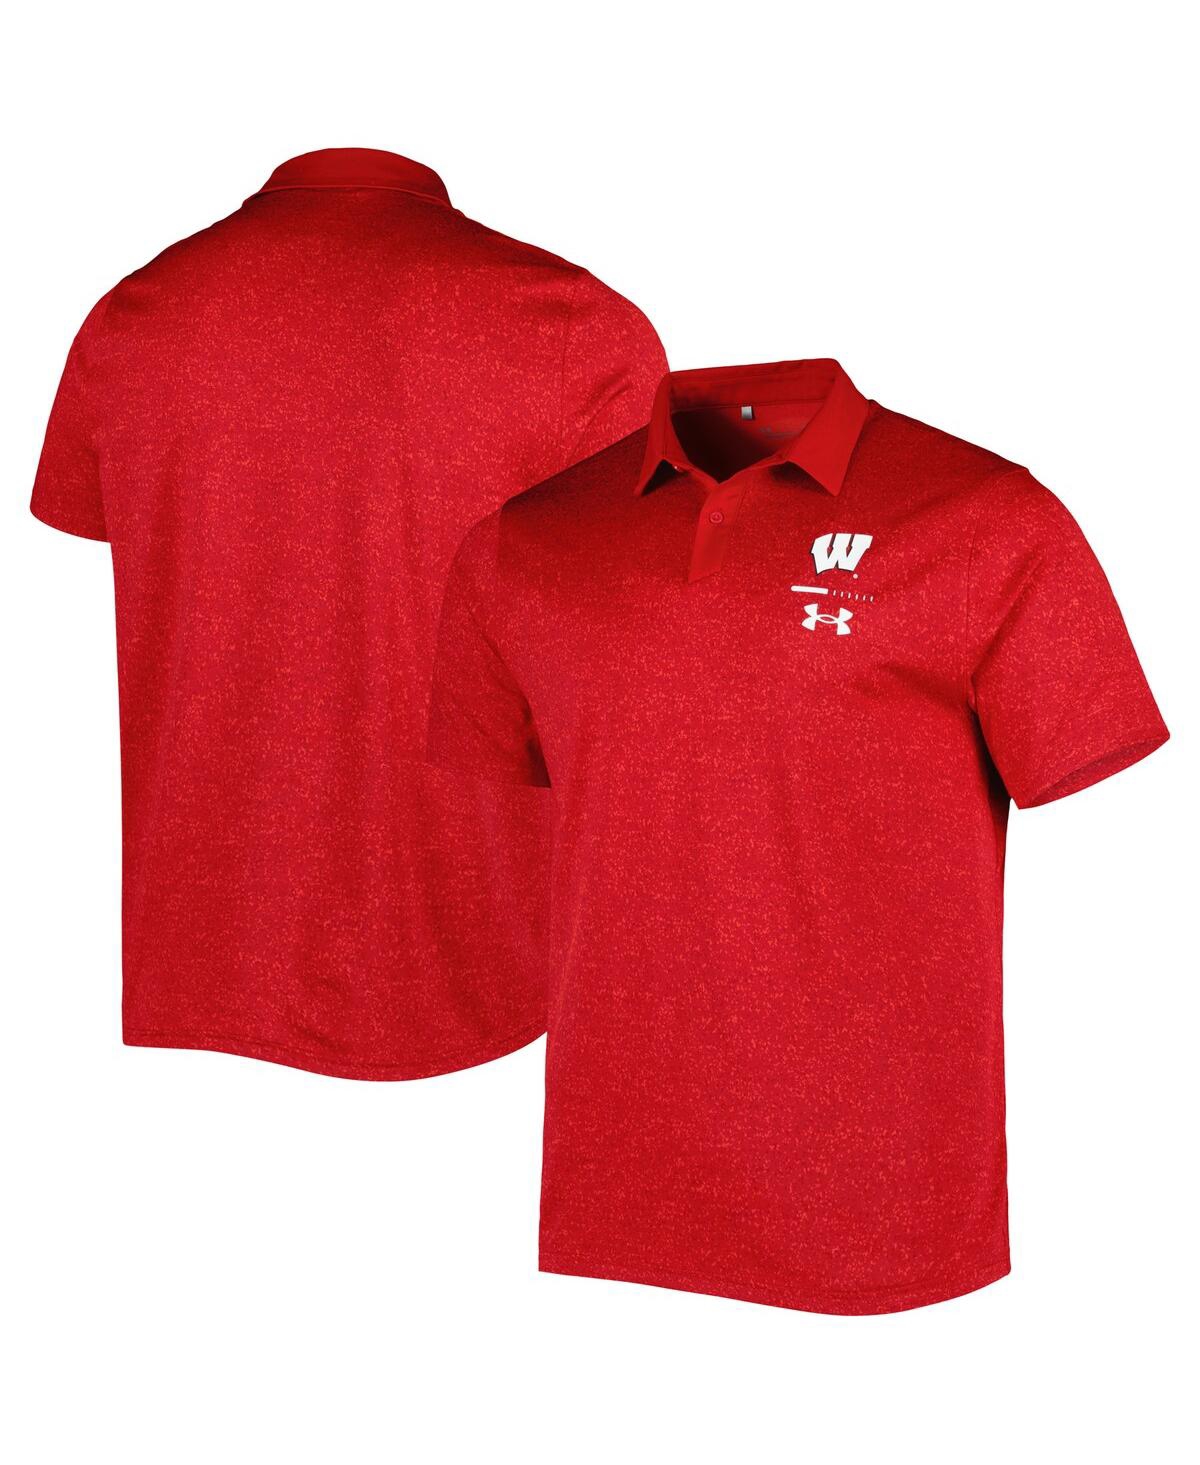 Under Armour Men's  Red Wisconsin Badgers Static Performance Polo Shirt